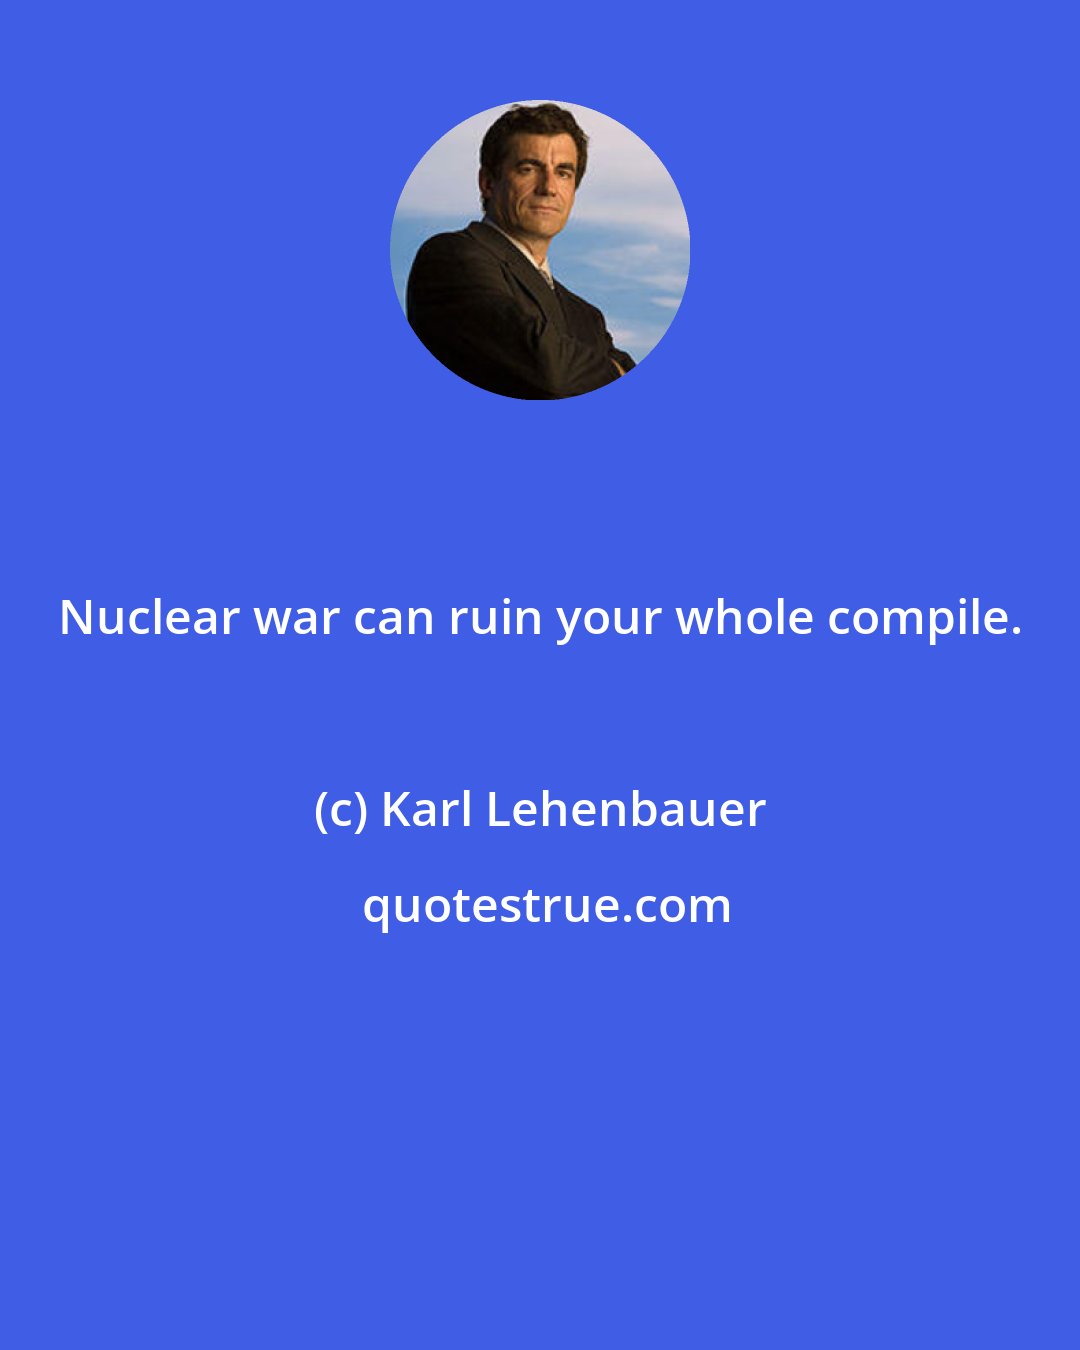 Karl Lehenbauer: Nuclear war can ruin your whole compile.